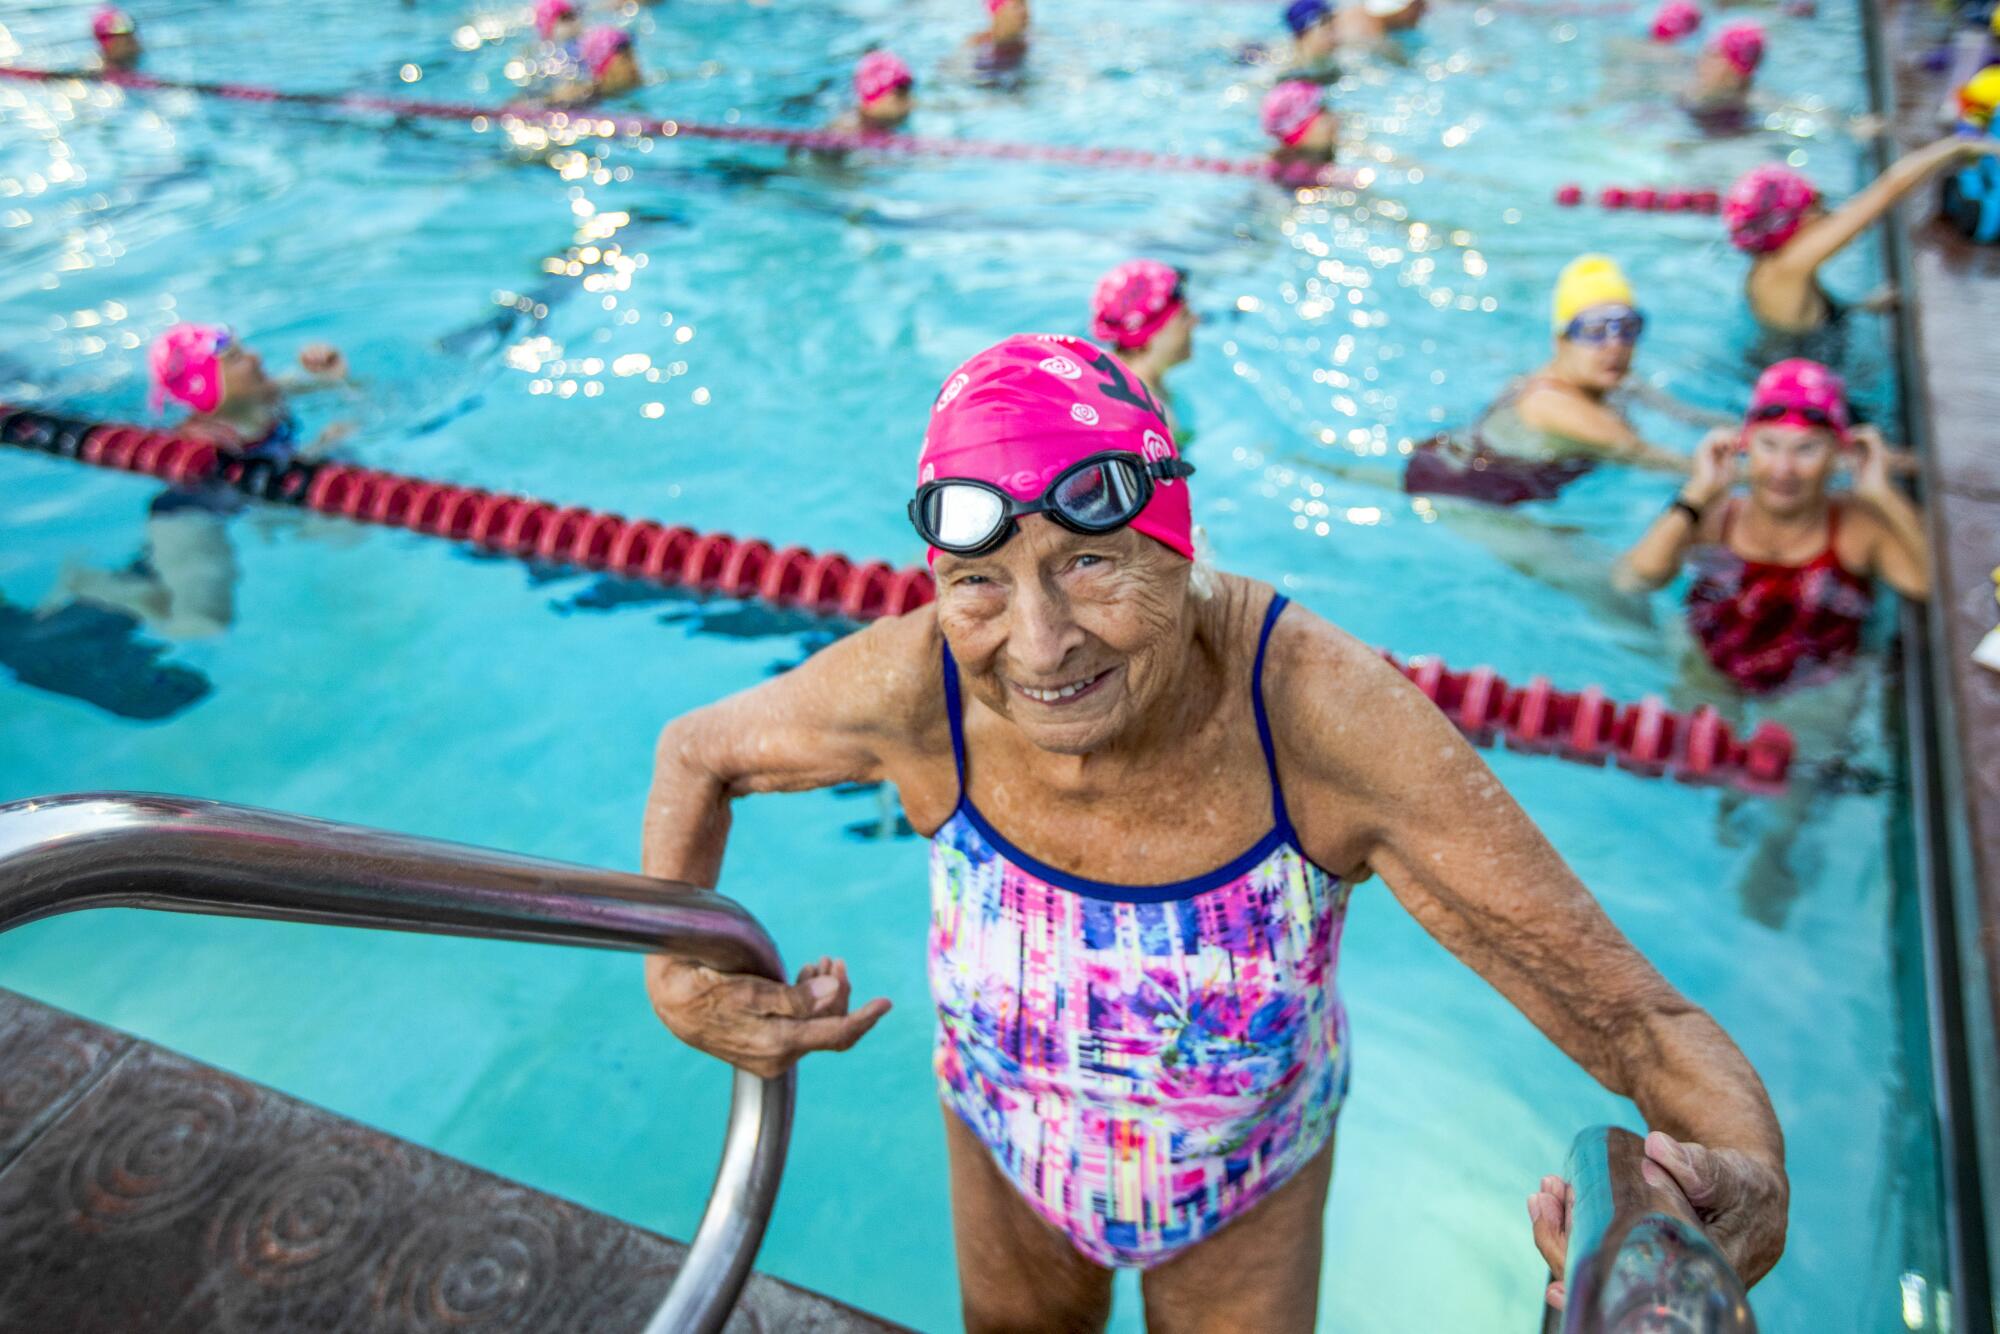 A 100-year-old woman in a multicolored bathing suit stands at the edge of a pool where other swimmers are in the water